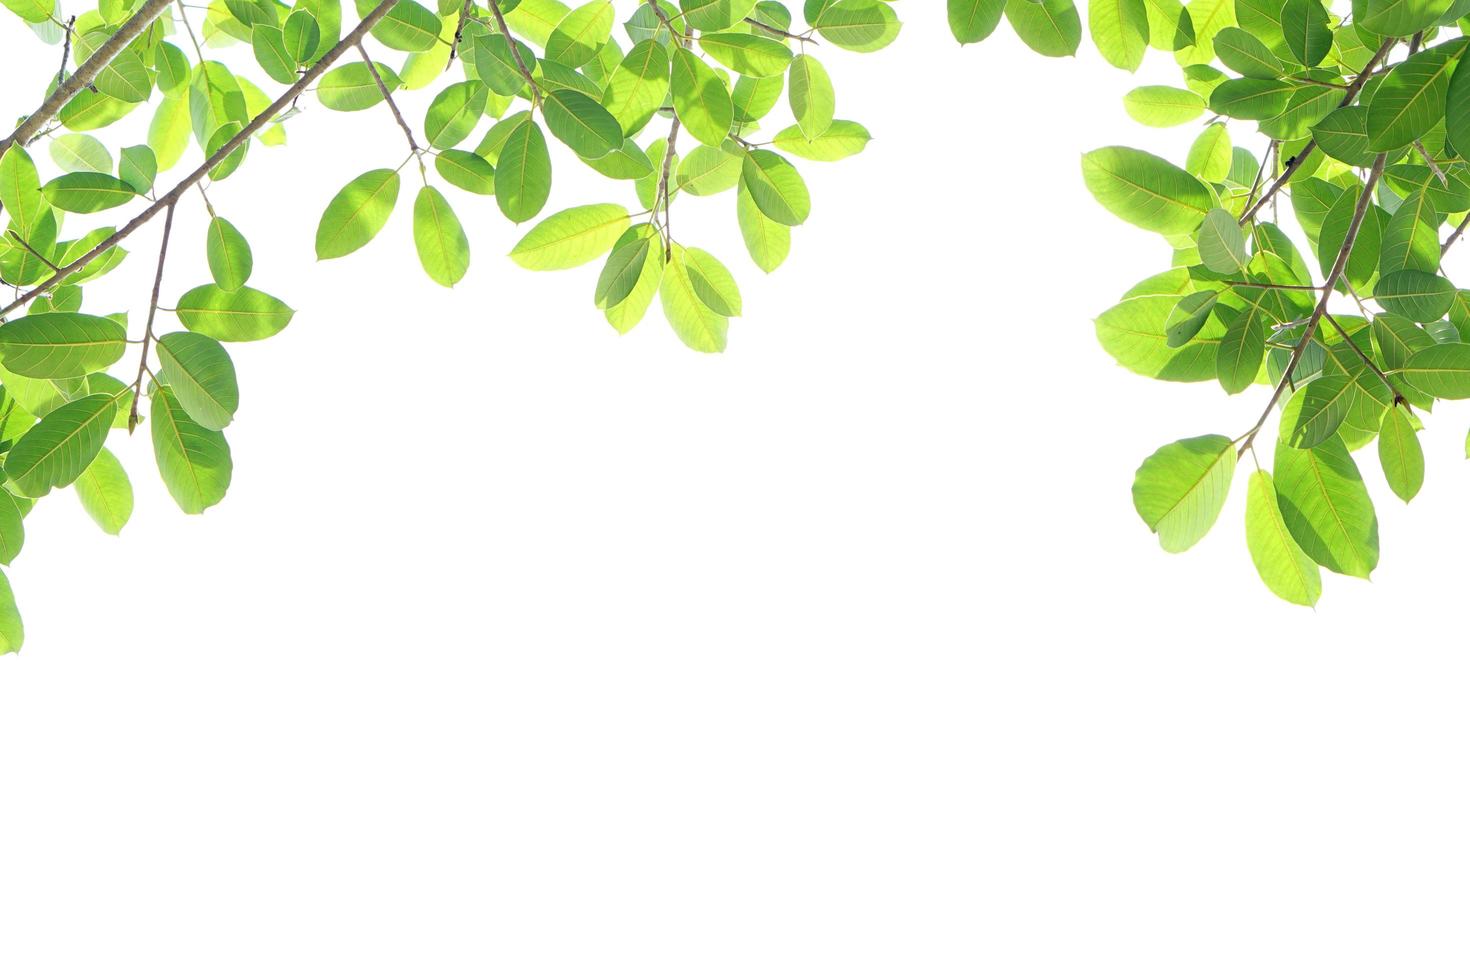 World environment day.Green leaves on a white background photo